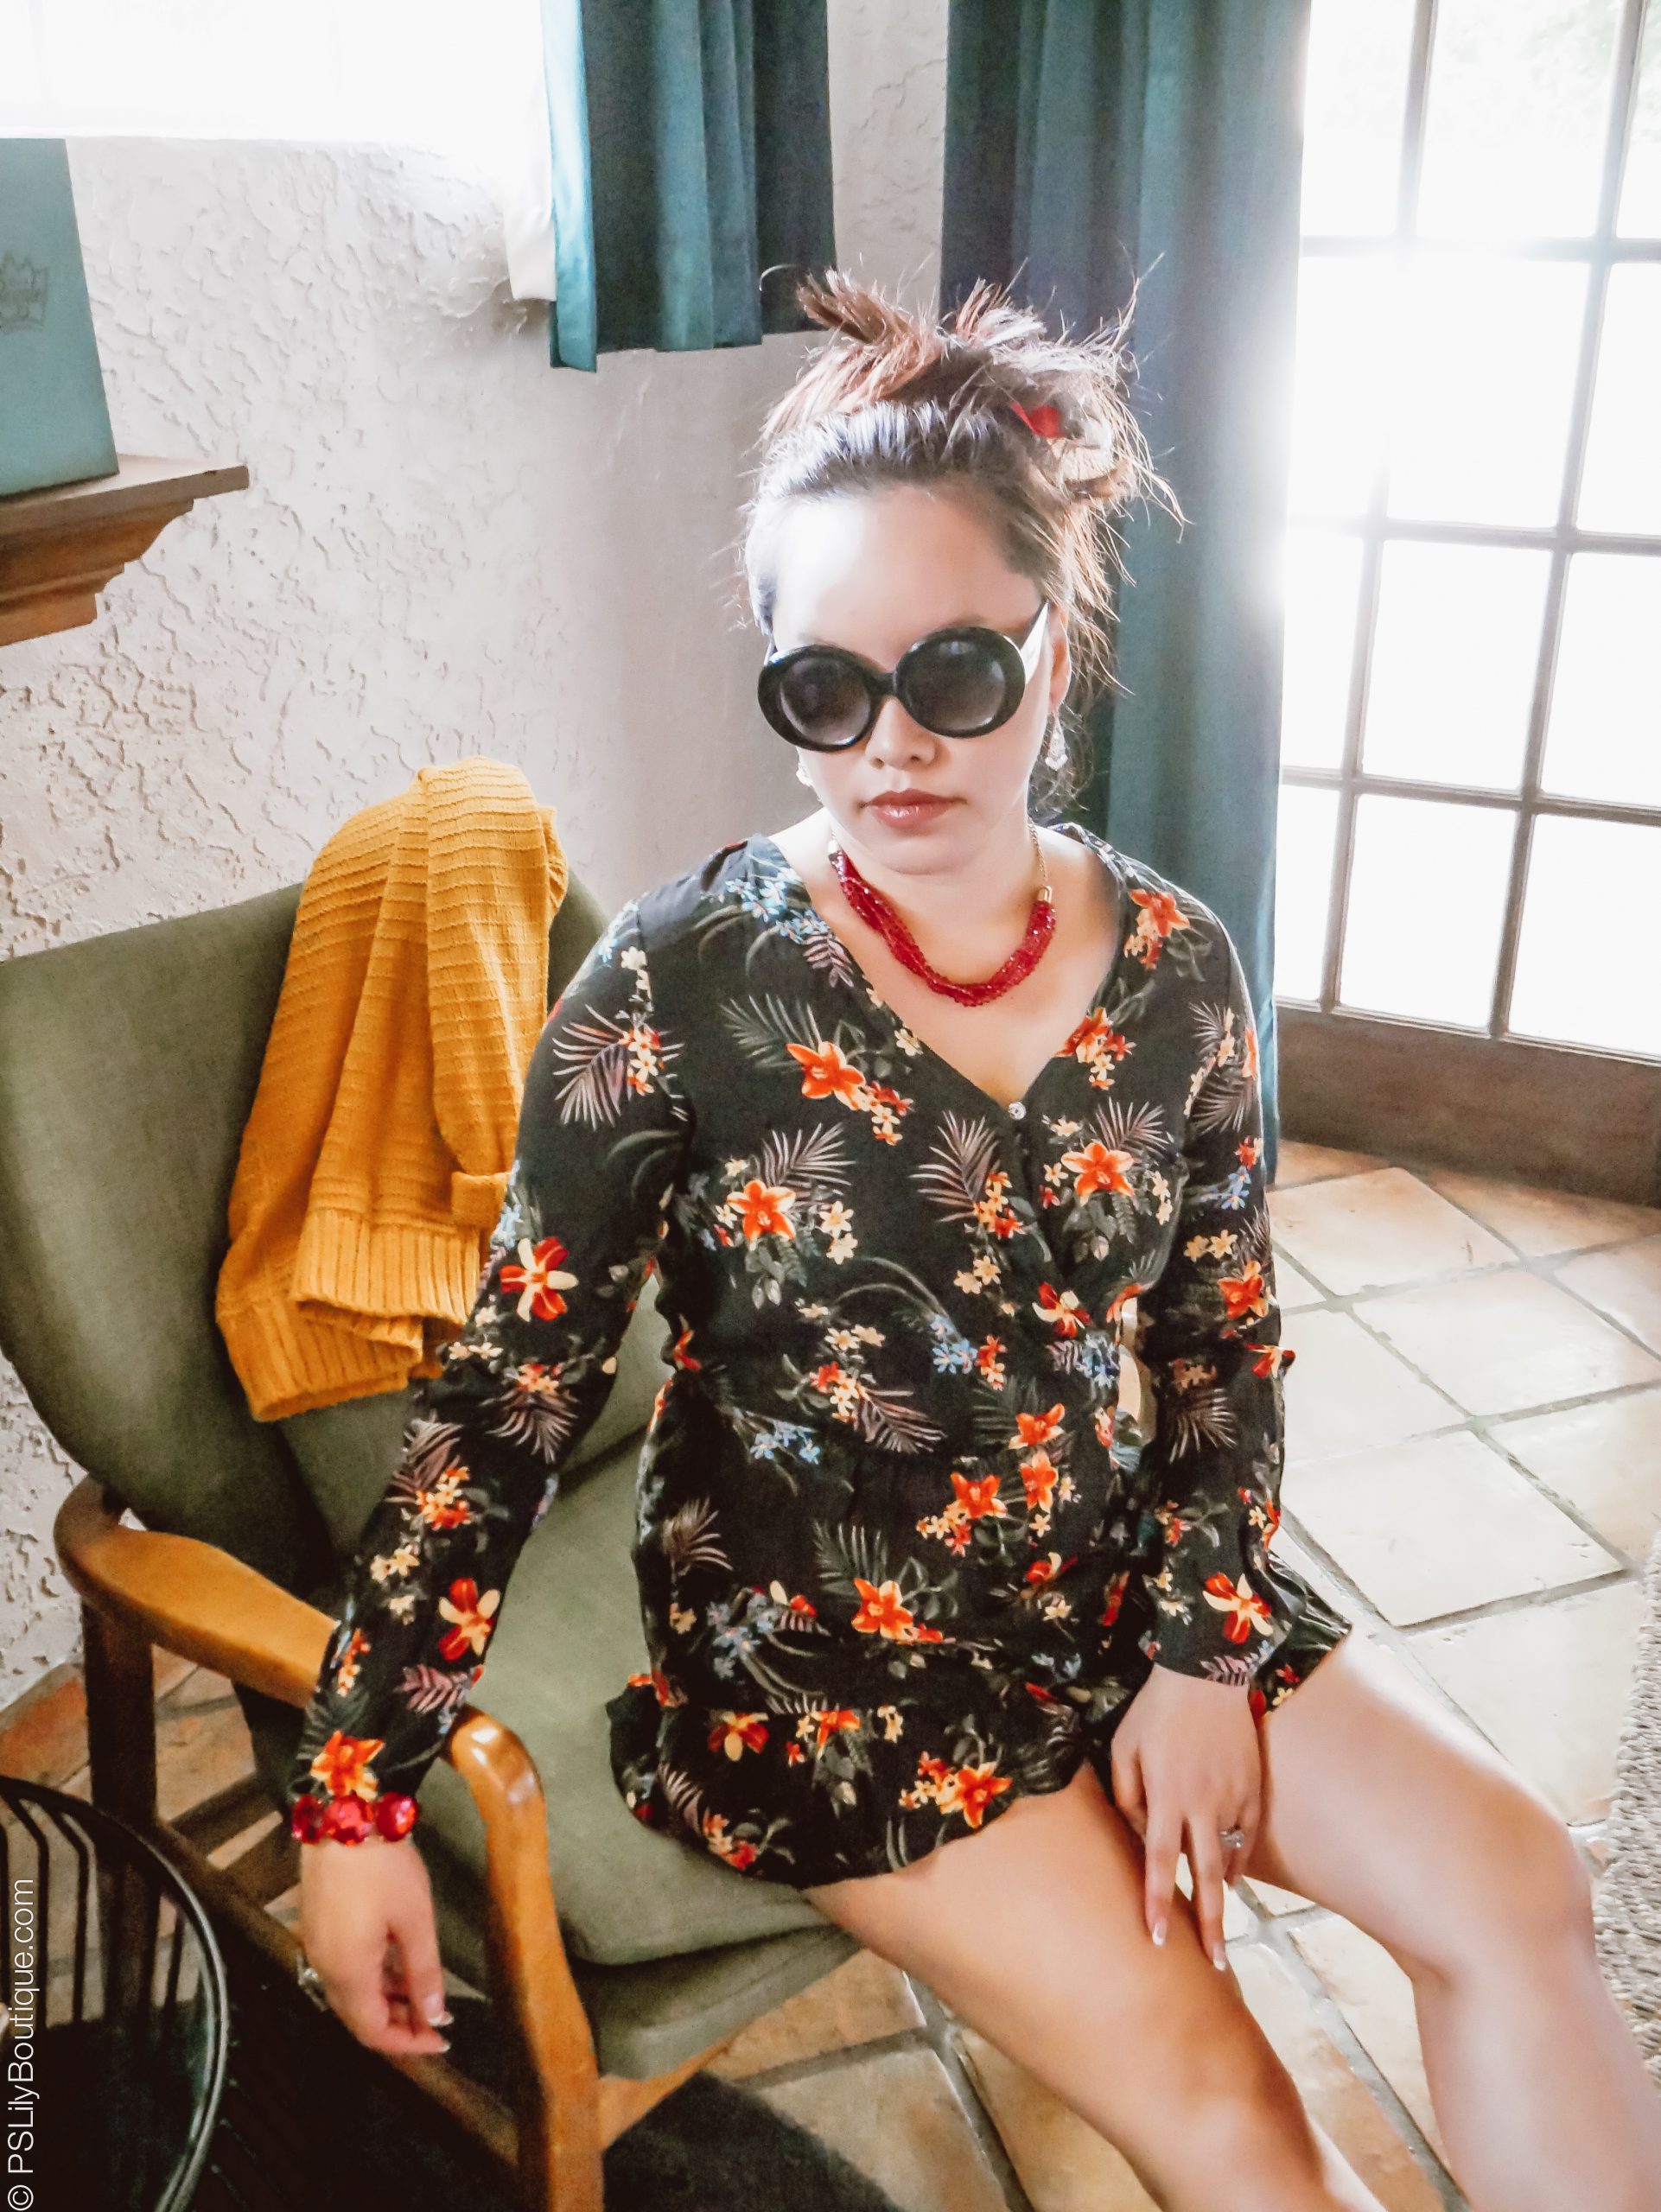 PSLily-Boutique-on-instagram-pinterest-celine-black-sunglasses-yellow-hm-cardigan-fall-2019-outfit-ideas-los-angeles-fashion-blogger-travel-zimmermann-romper_Palm_Springs-104, Instagram: @pslilyboutique, Pinterest, Los Angeles fashion blogger, top fashion blog, best fashion blog, fashion & personal style blog, travel blog, lifestyle blogger, travel blogger, LA fashion blogger, chicago based fashion blogger, fashion influencer, luxury fashion, luxury travel, luxury influencer, luxury lifestyle, lifestyle blog, resort style, travel style, luxury interior, luxury home, luxury hotel